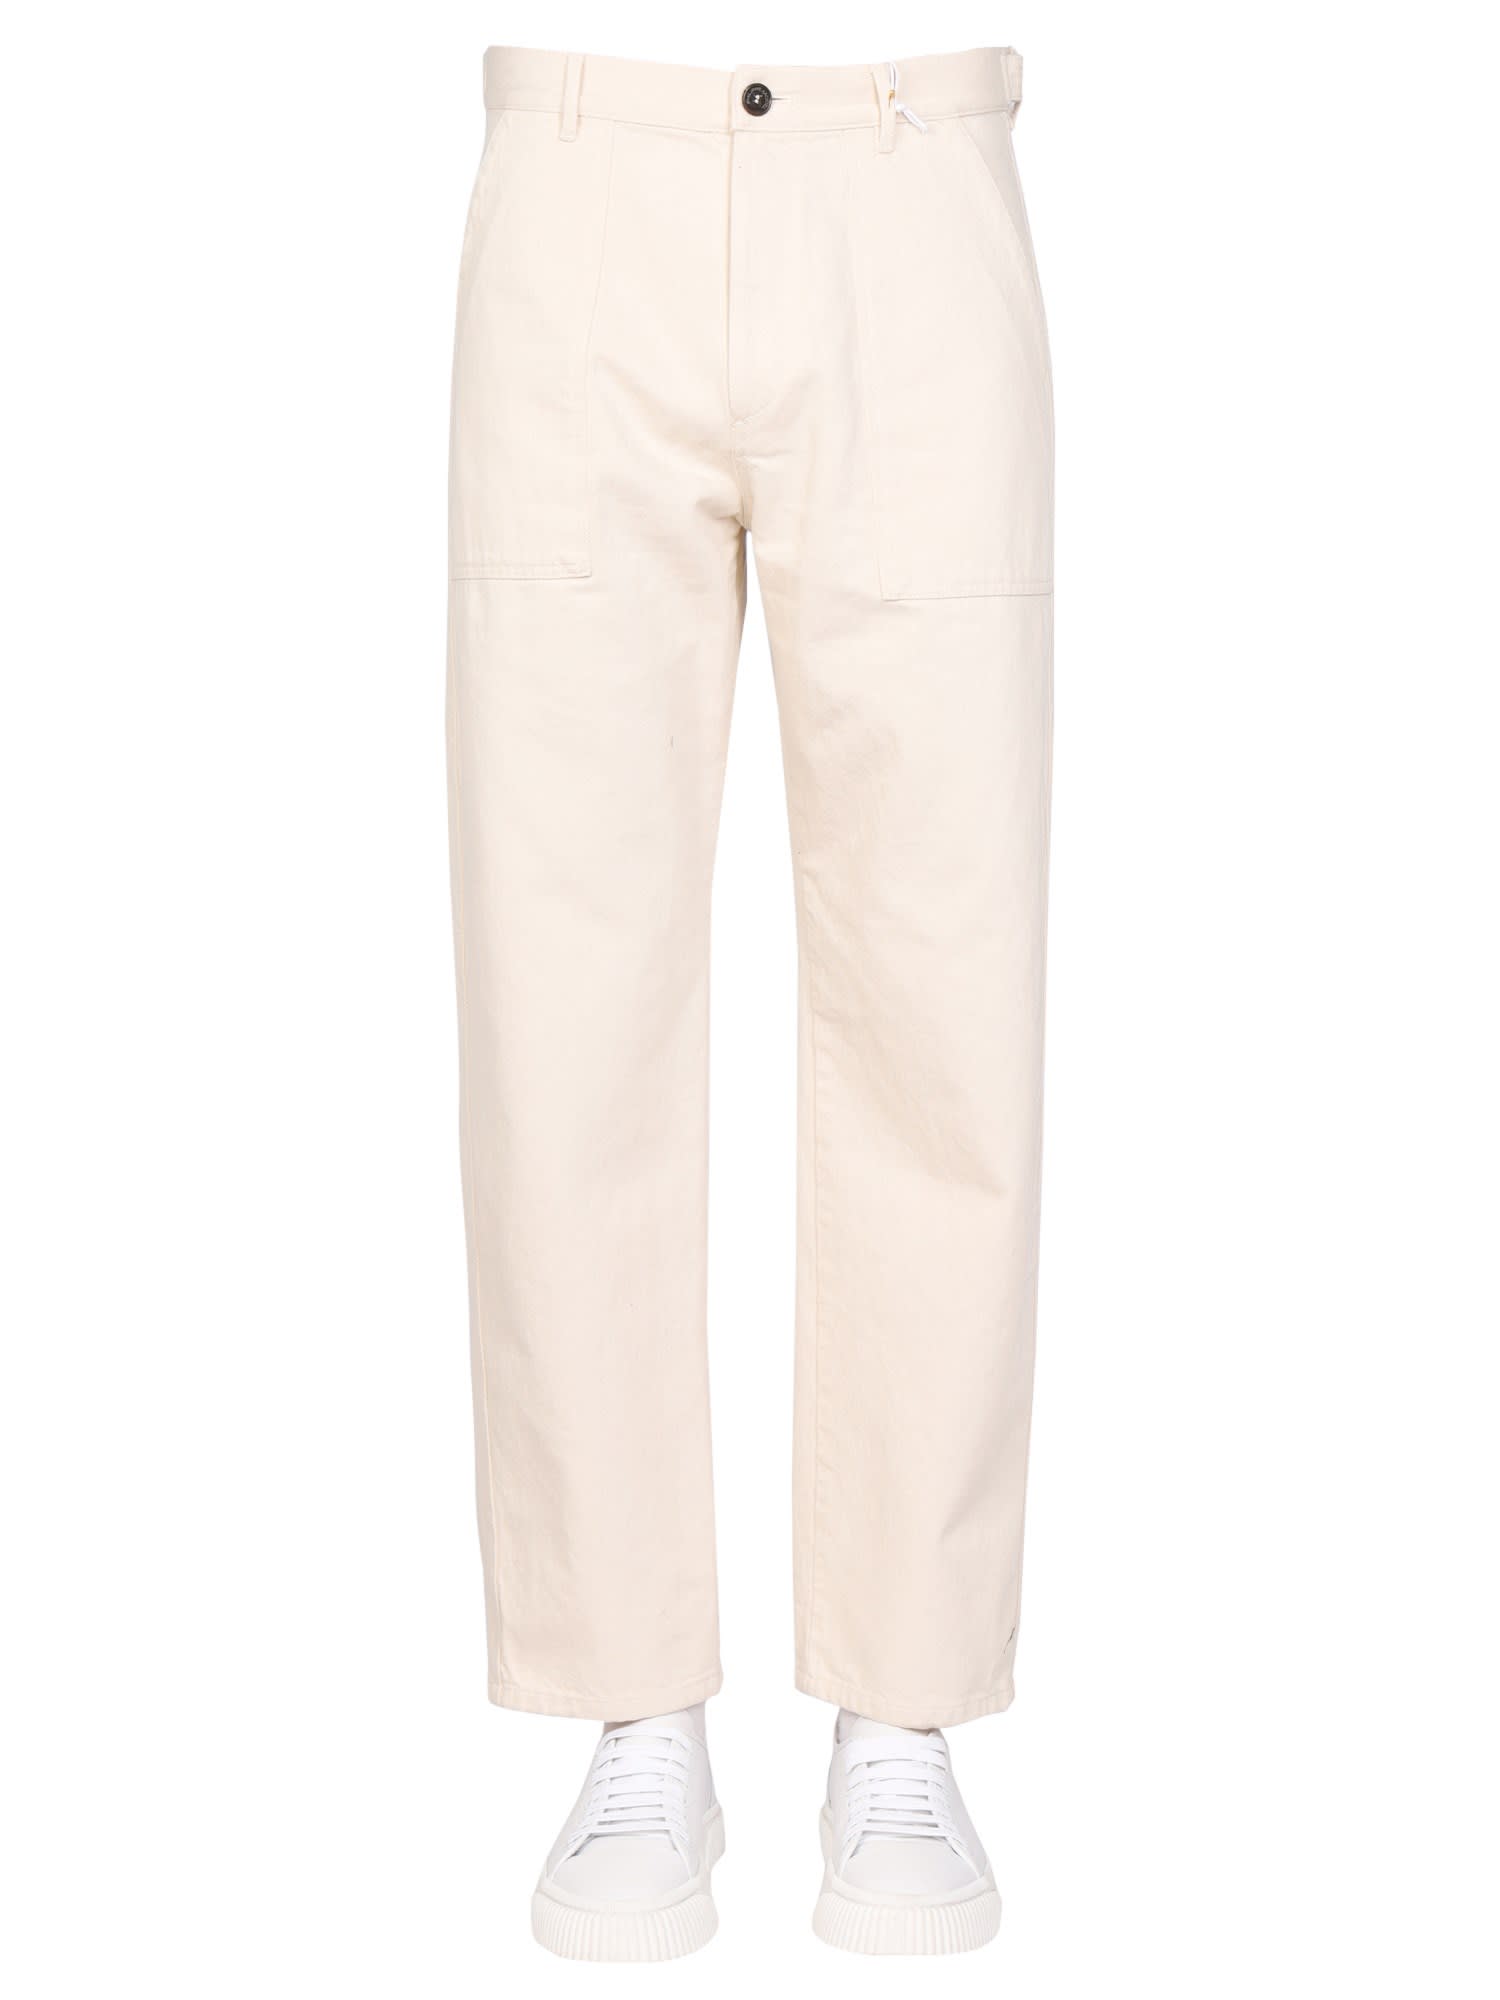 Philippe Model Cotton Trousers